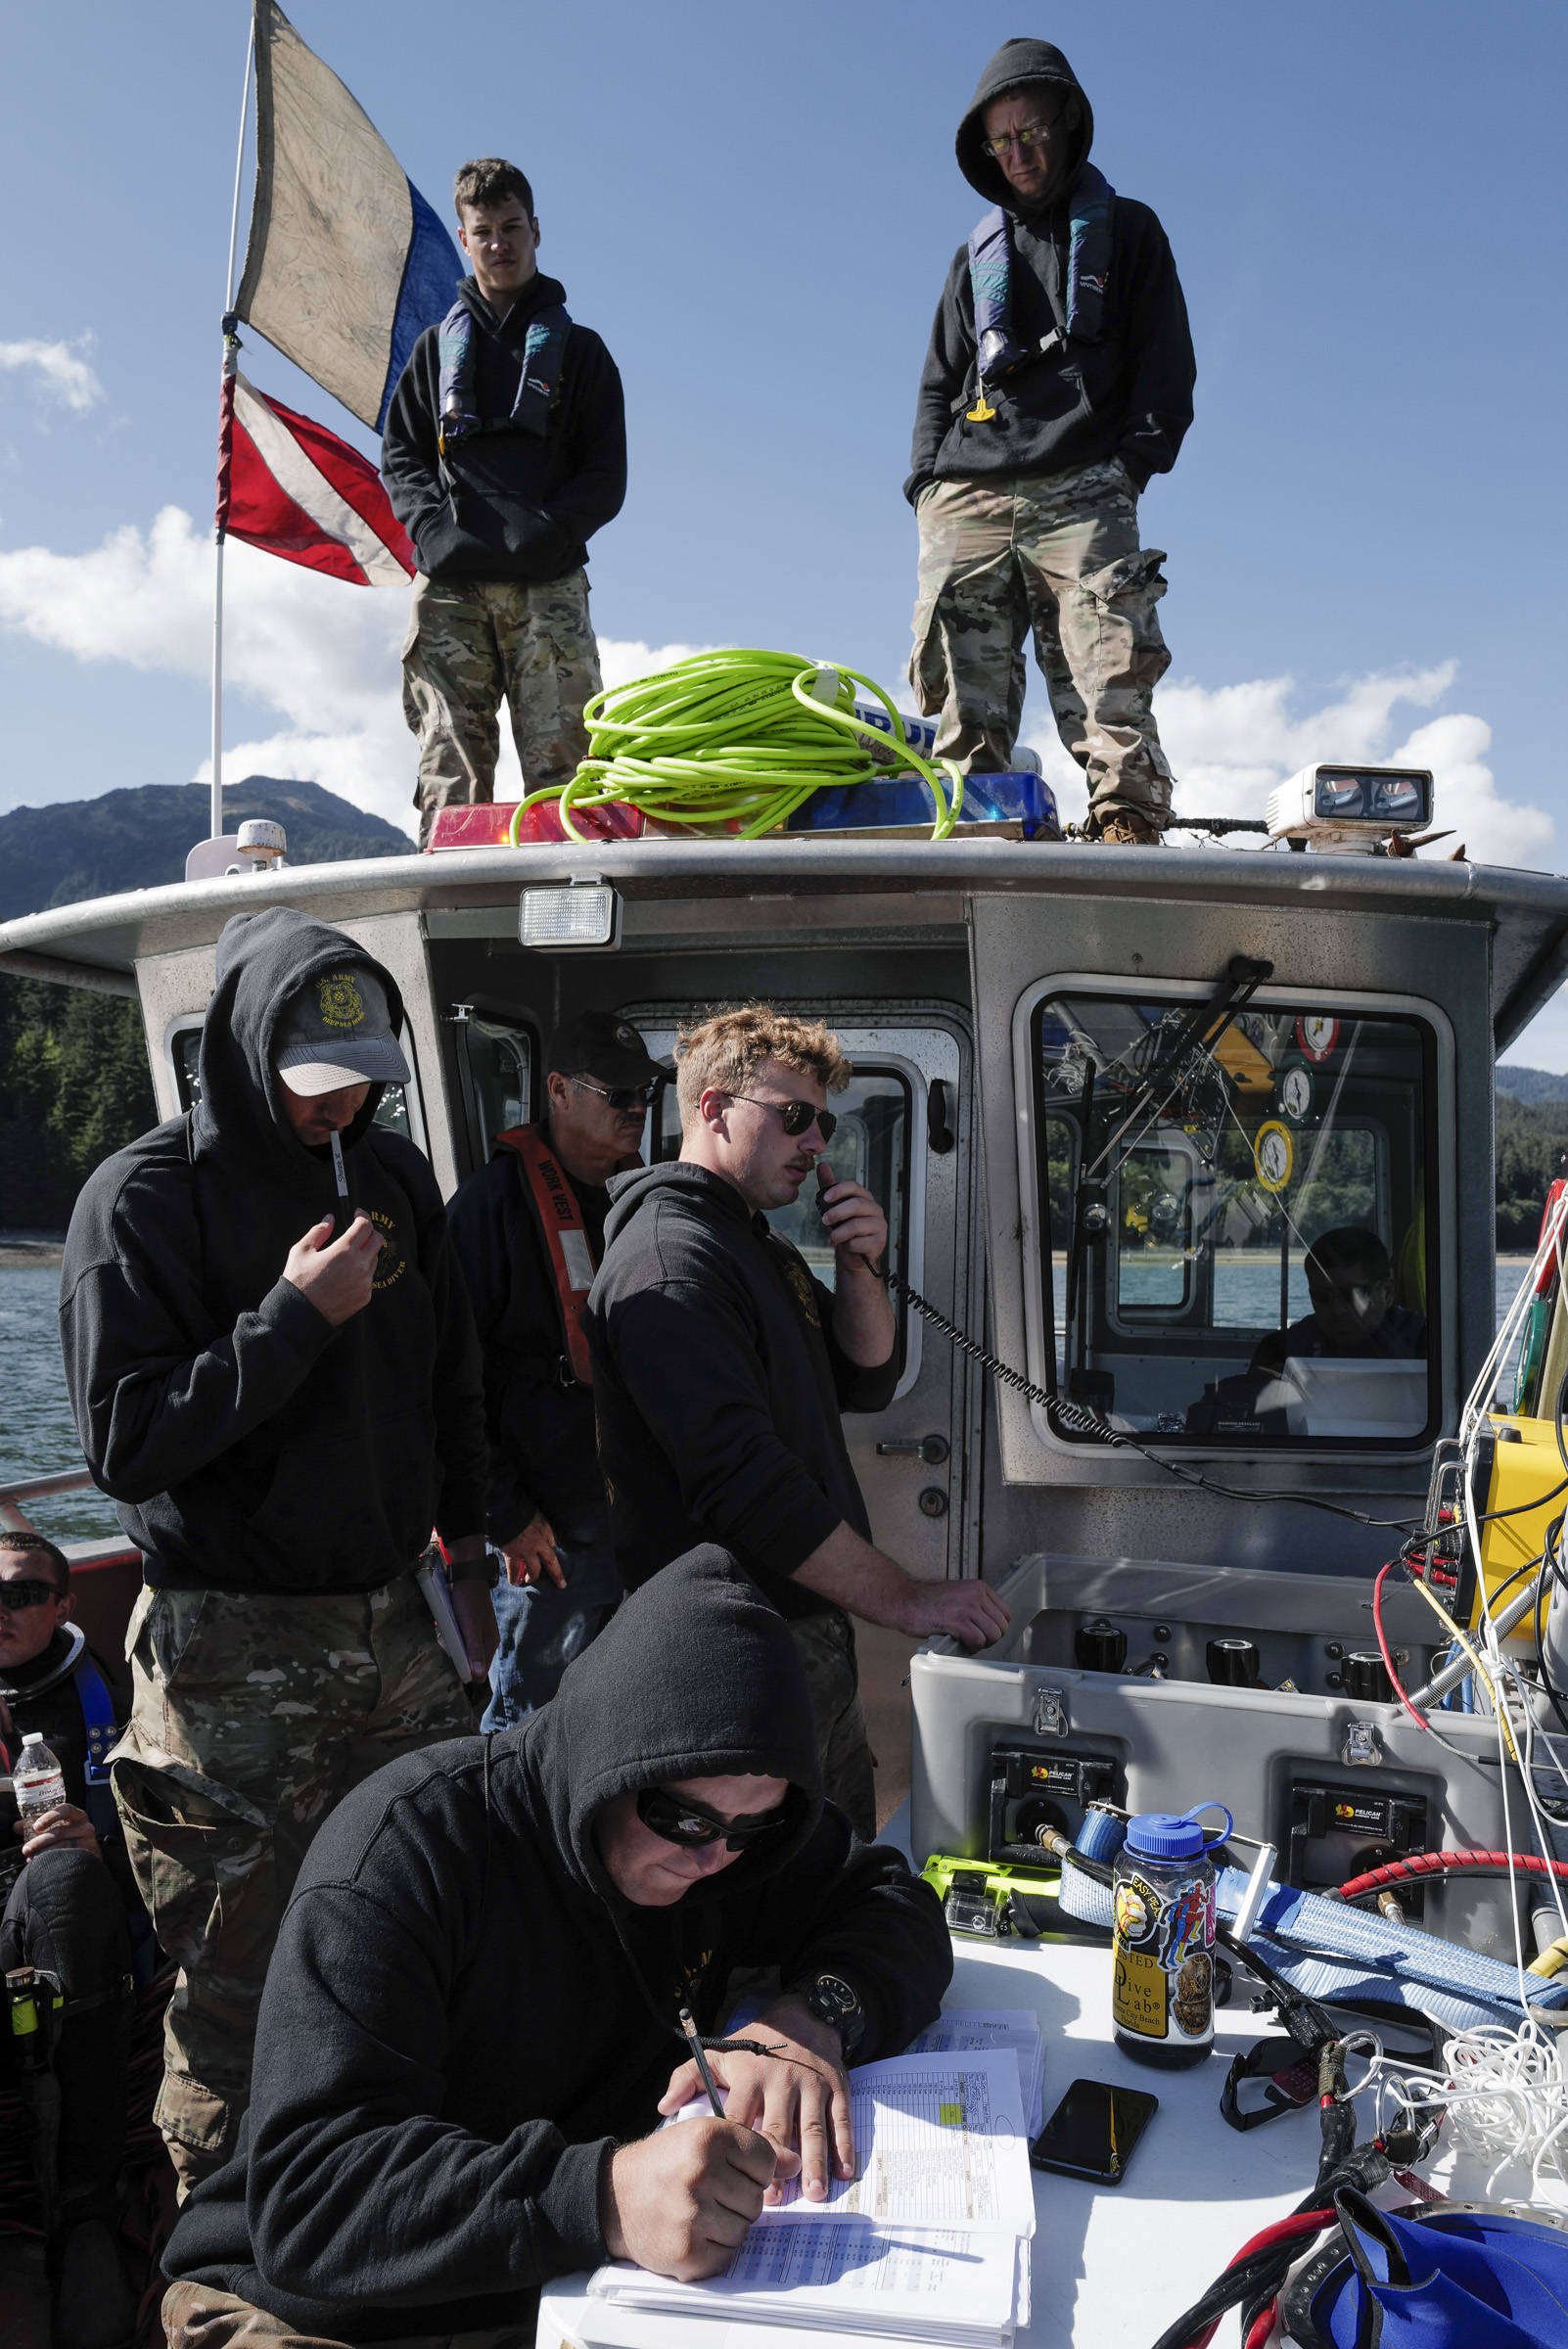 Members of the Army’s 74th Engineer Dive Detachment work off a Juneau Harbormaster boat to retrieve lost crab pots in Gastineau Channel for the Douglas Indian Association/NOAA Marine Debris Project on Thursday, Sept. 5, 2019. The project aims to identify and remove derelict crab pots and their continued negative impact on wildlife and the environment. (Michael Penn | Juneau Empire)